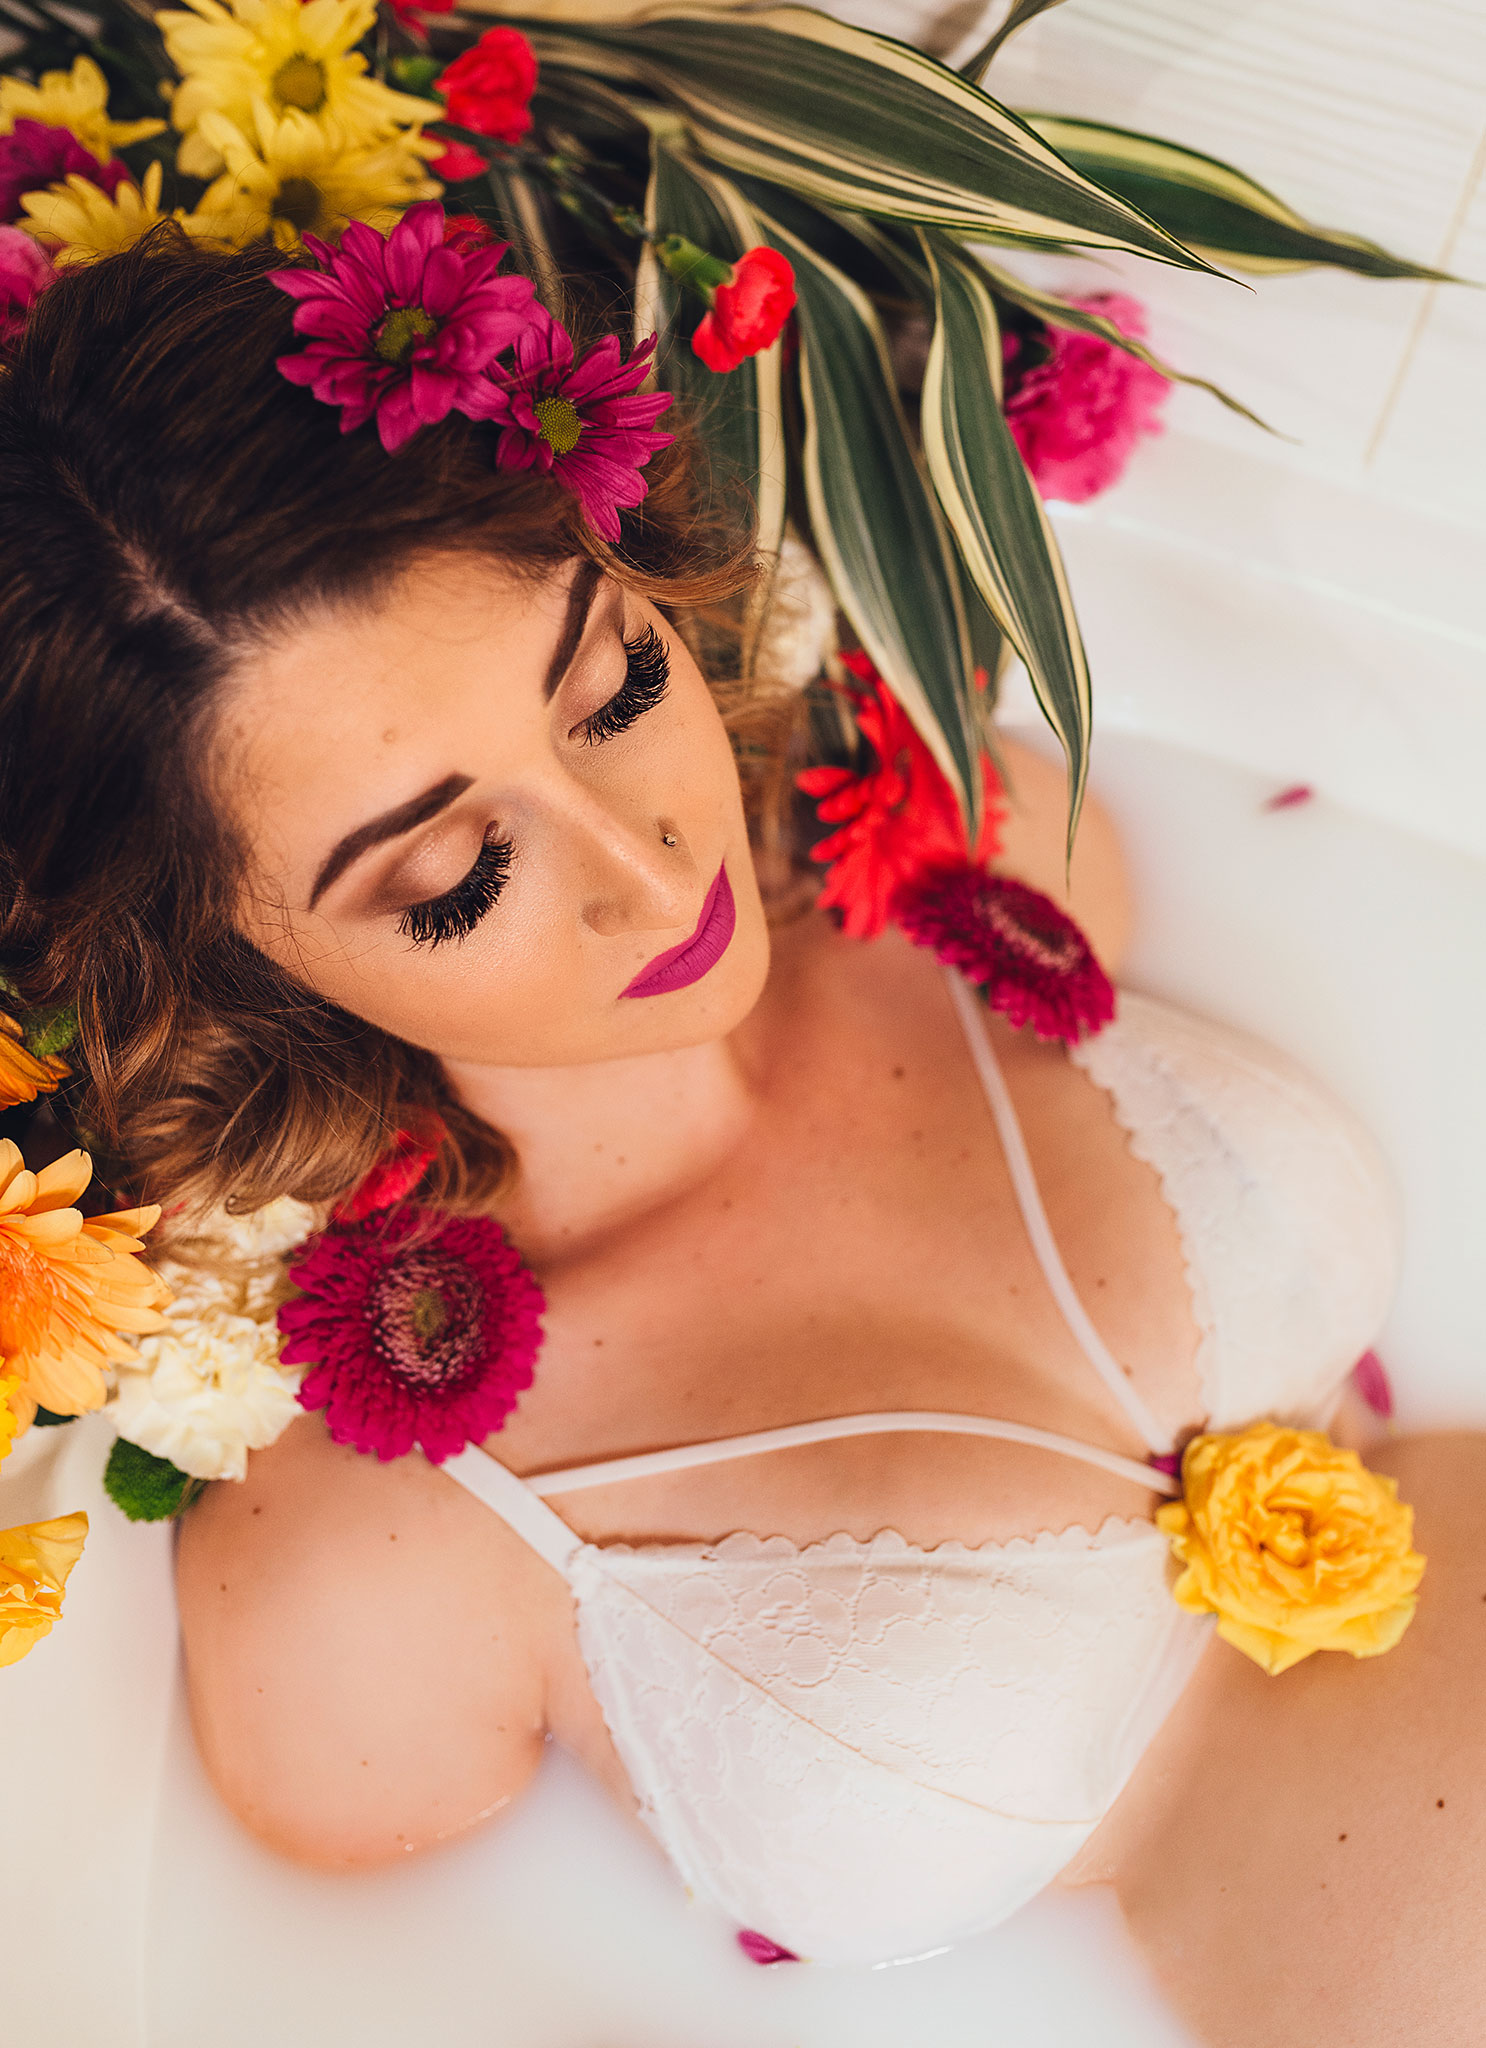 Milk bath maternity photography with brightly coloured flowers and makeup.